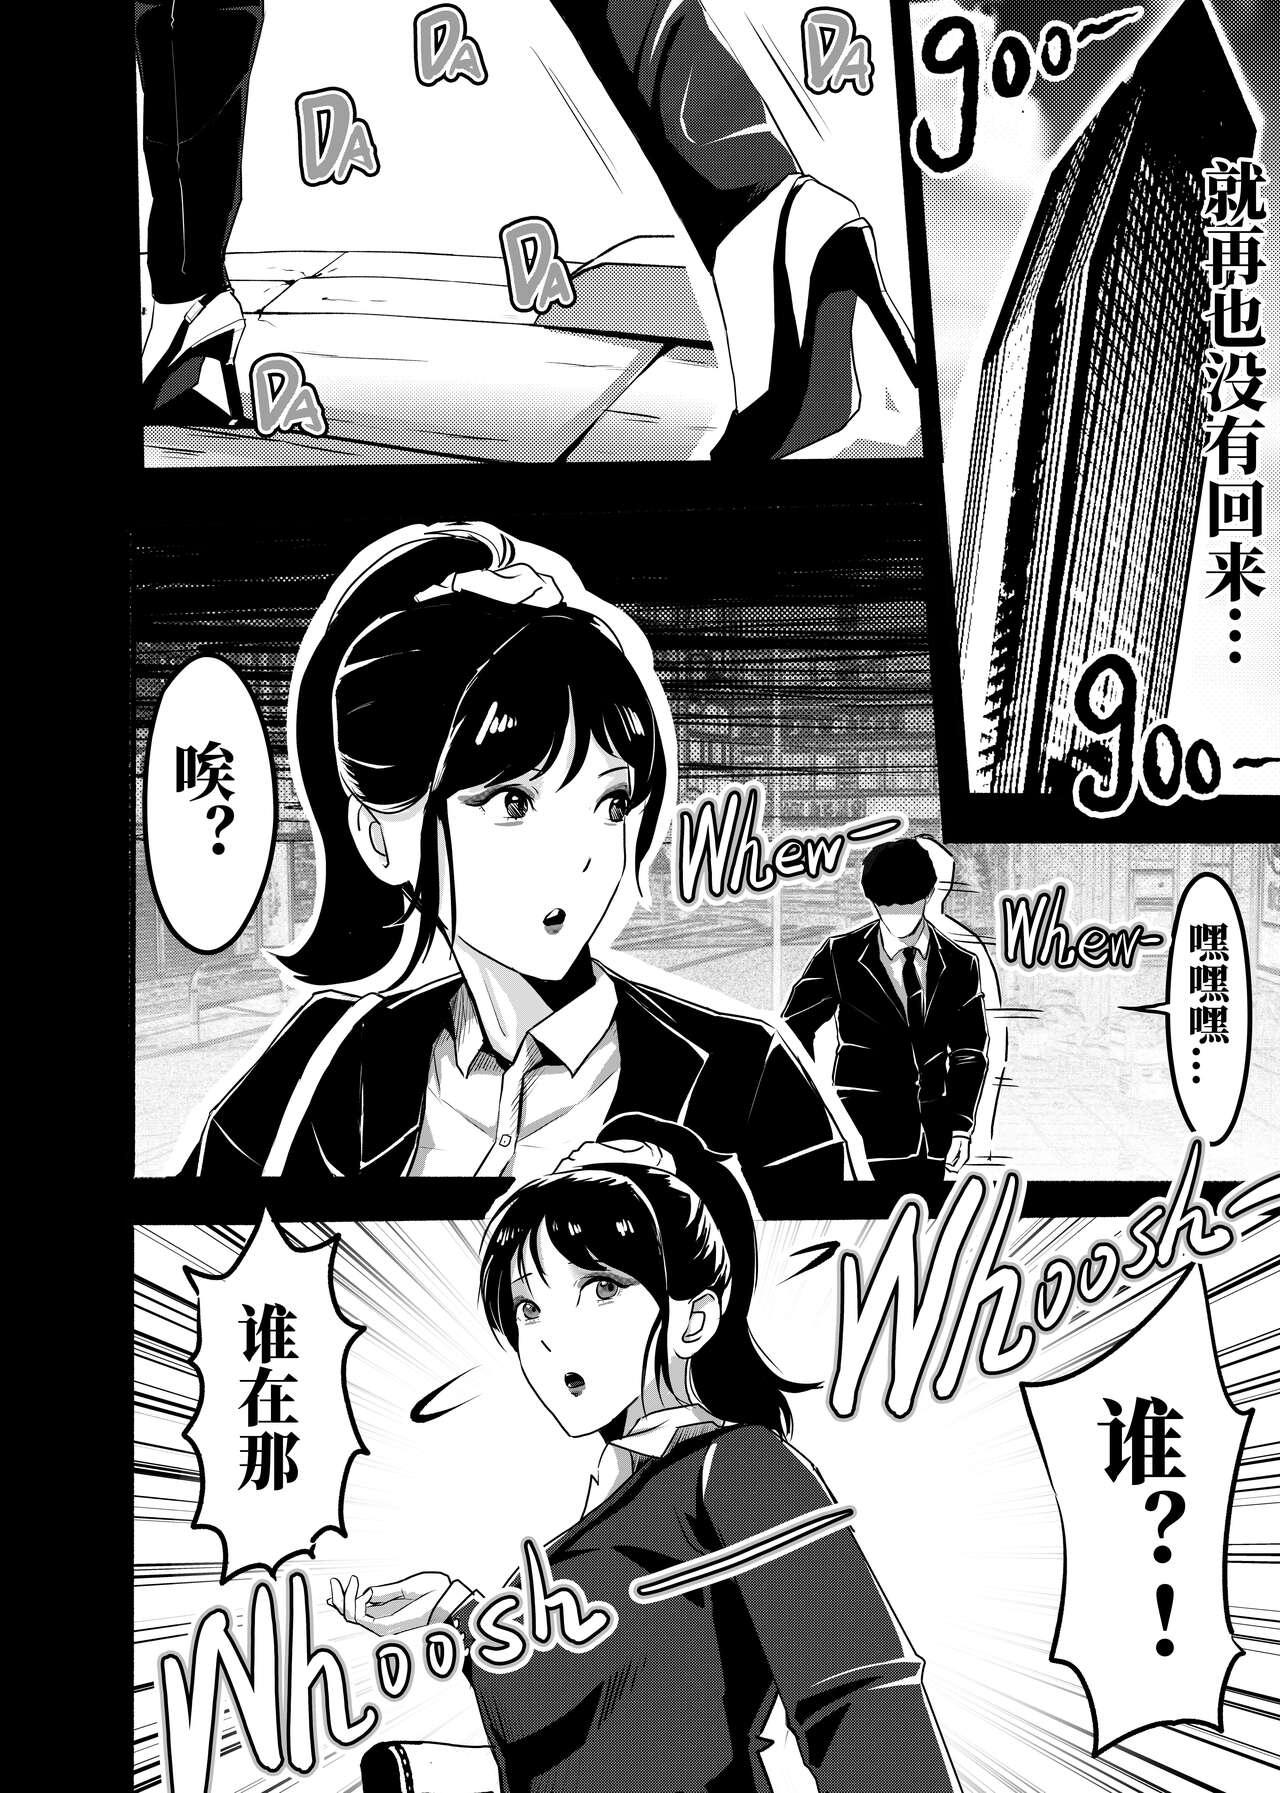 [KAO.YELLOW STUDIO (T.C.X)] I must be out of my mind to fall in love with SAORI, the Snuff Queen Ch.1-16 | 想与冰恋女王纱织同学谈恋爱的我脑子一定有问题 第1-16话 [Chinese] 220